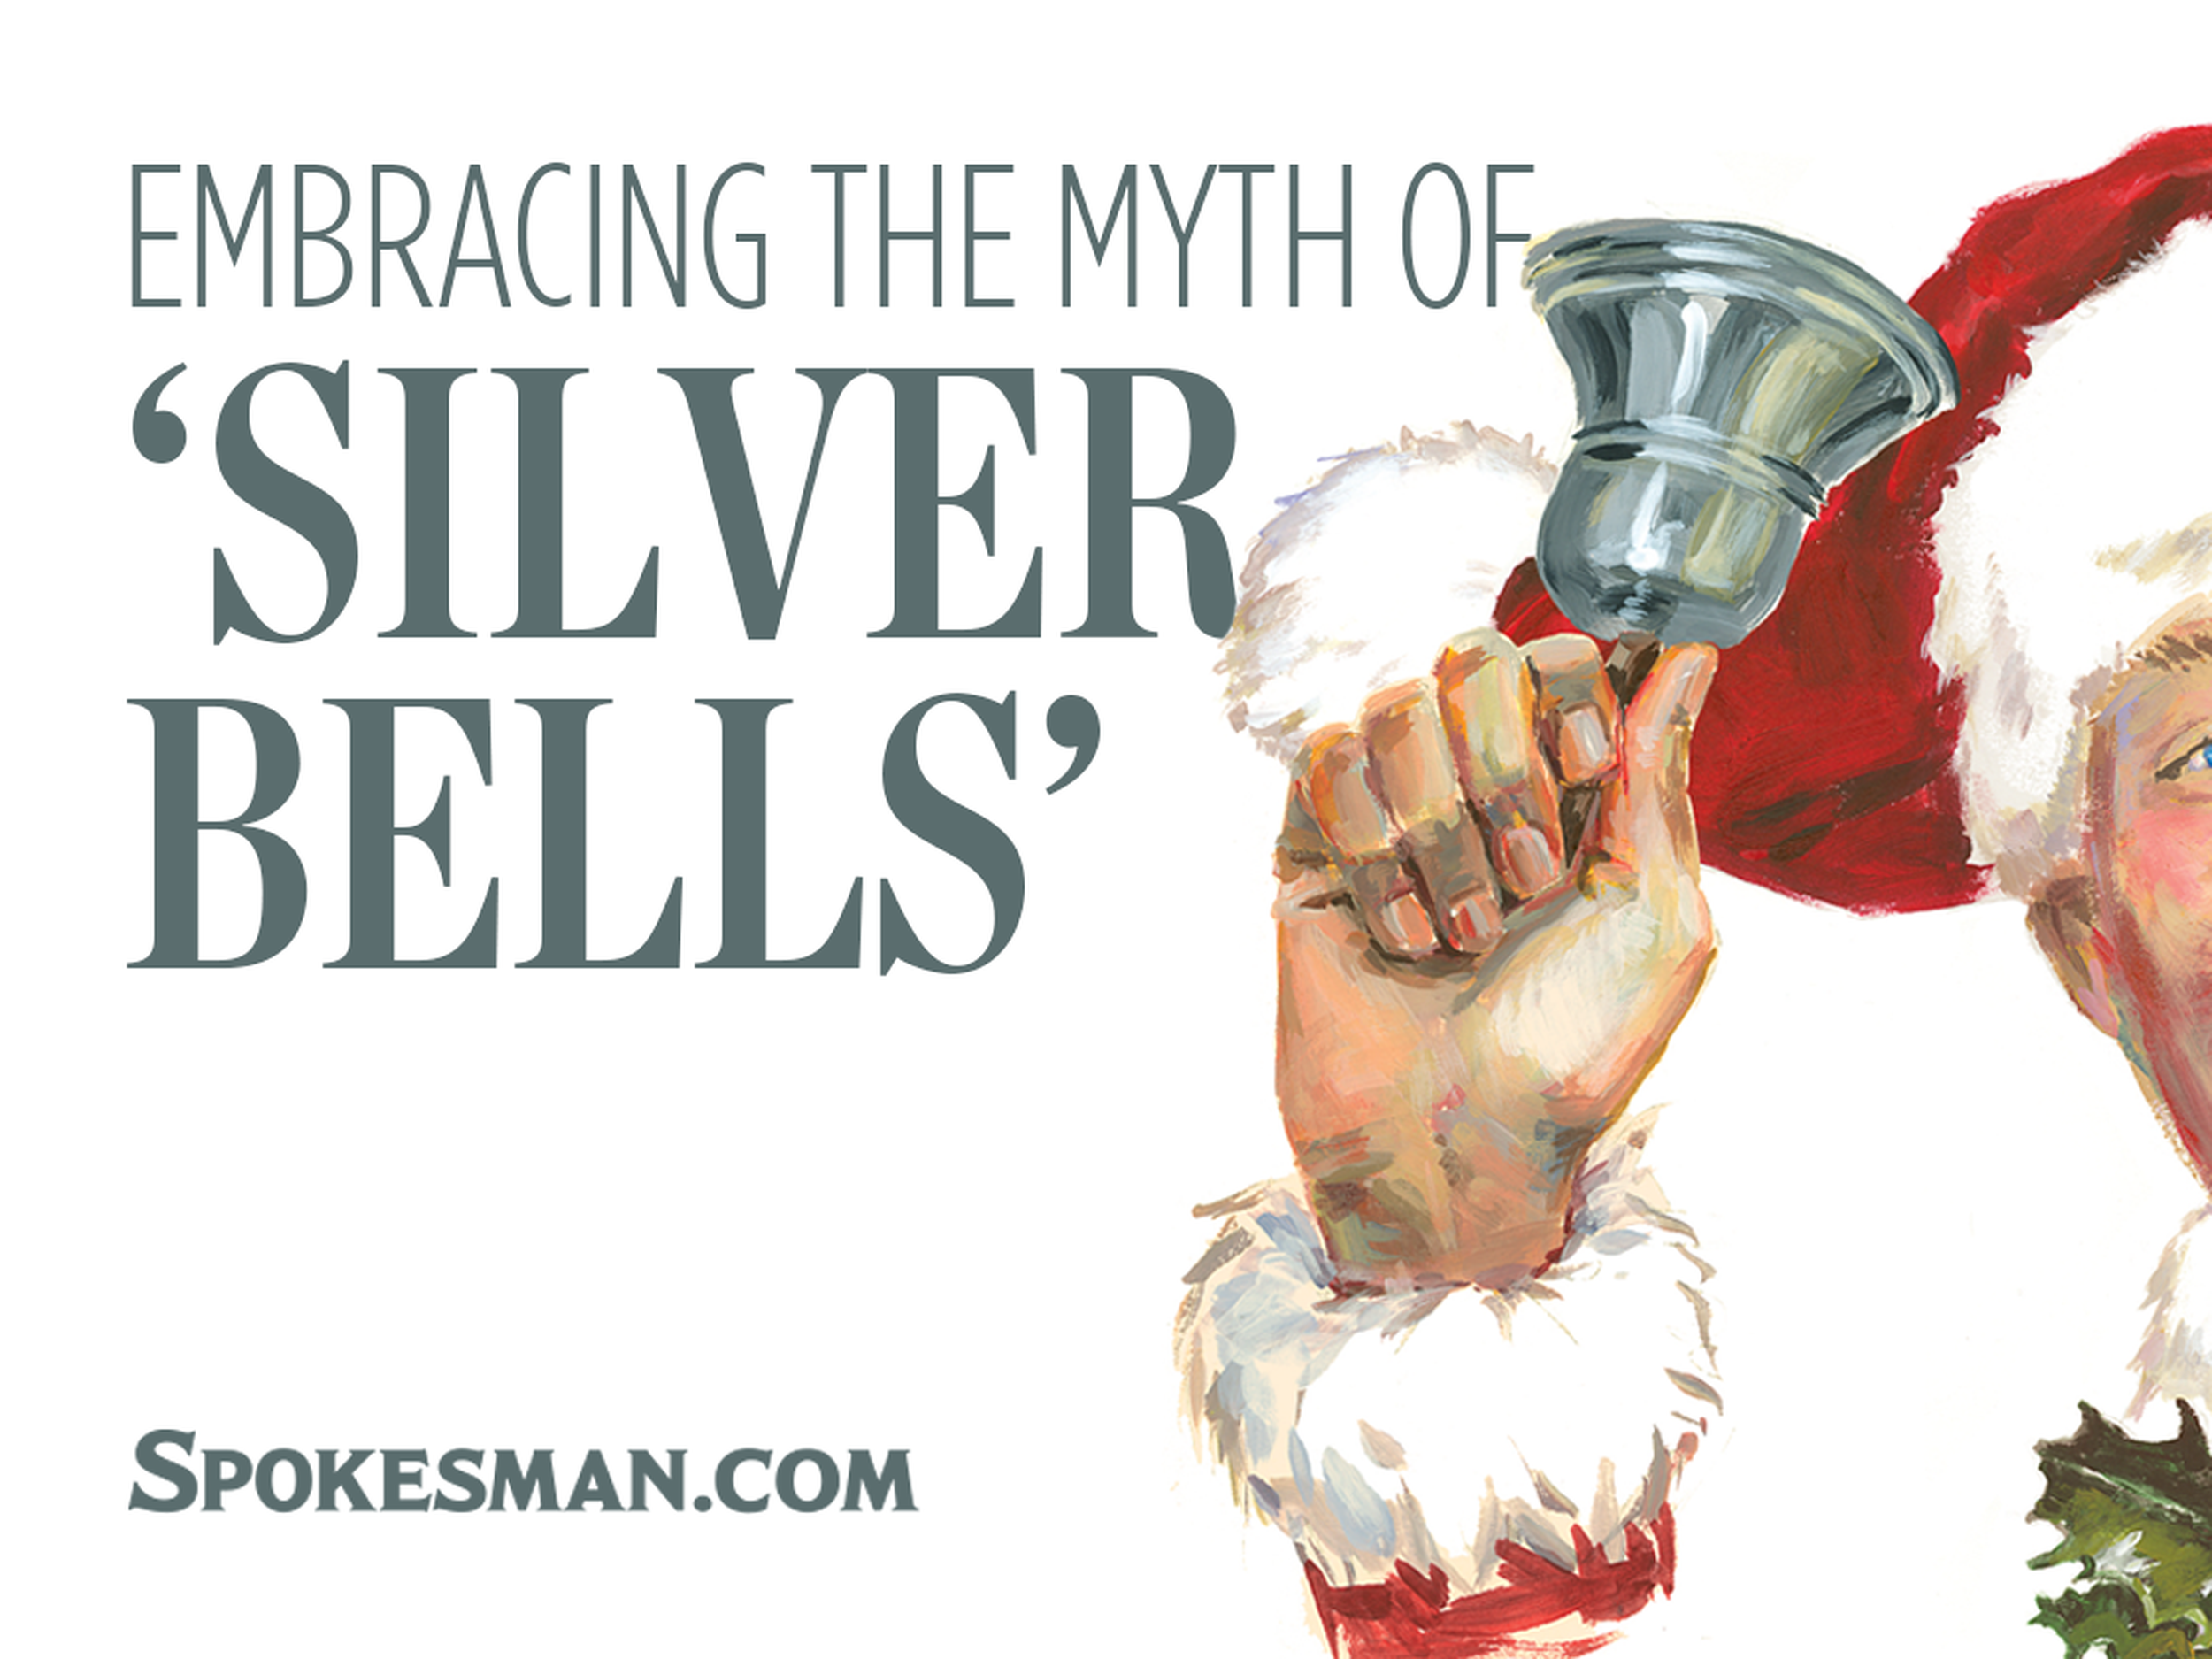 Rob Curley: Embracing the myth of 'Silver Bells